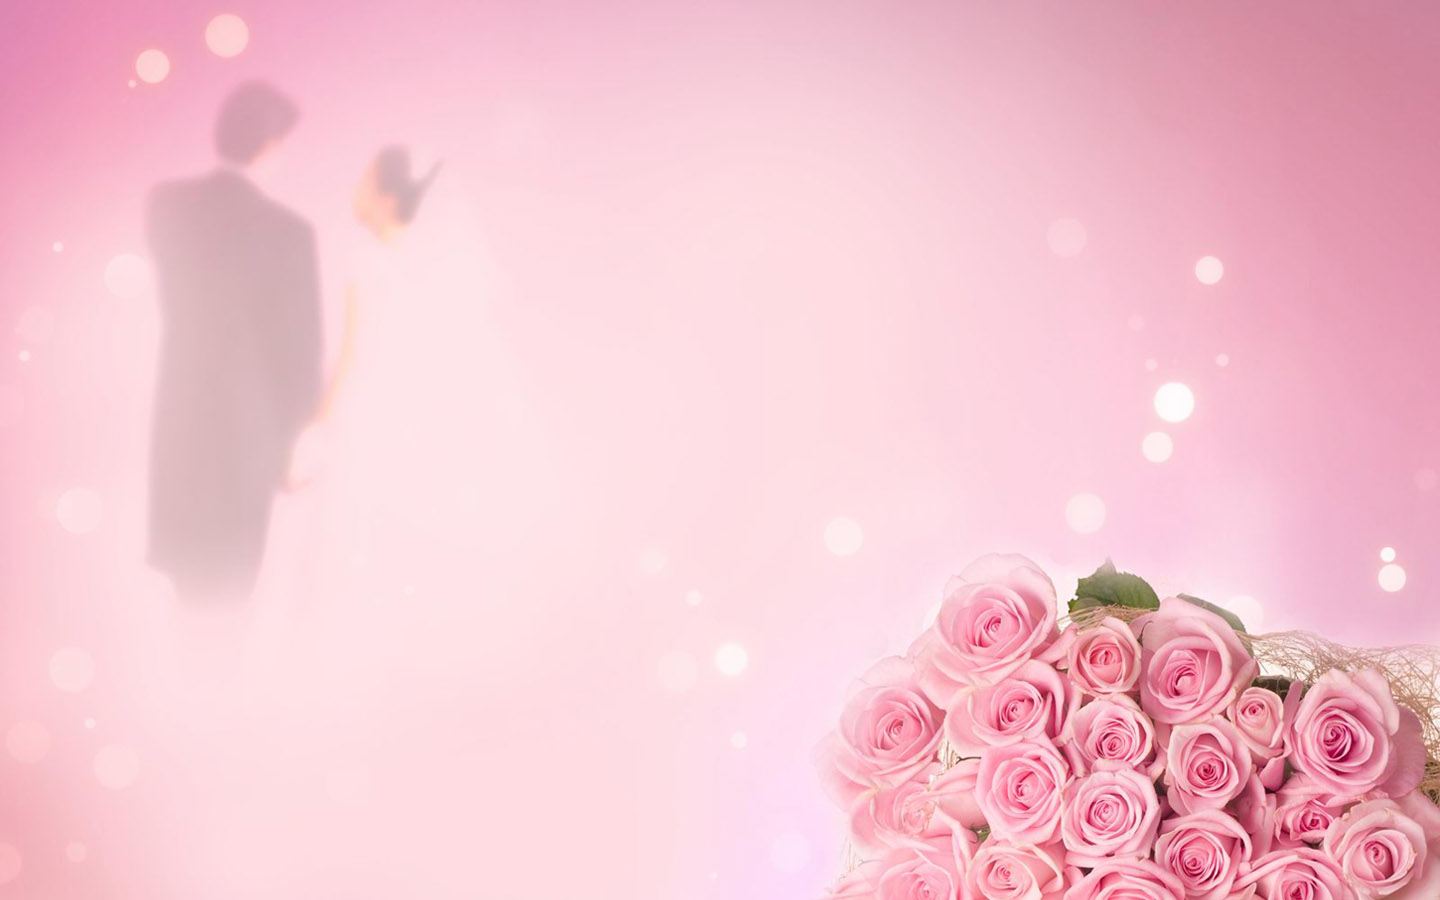 Rose Sweetheart powerpoint background